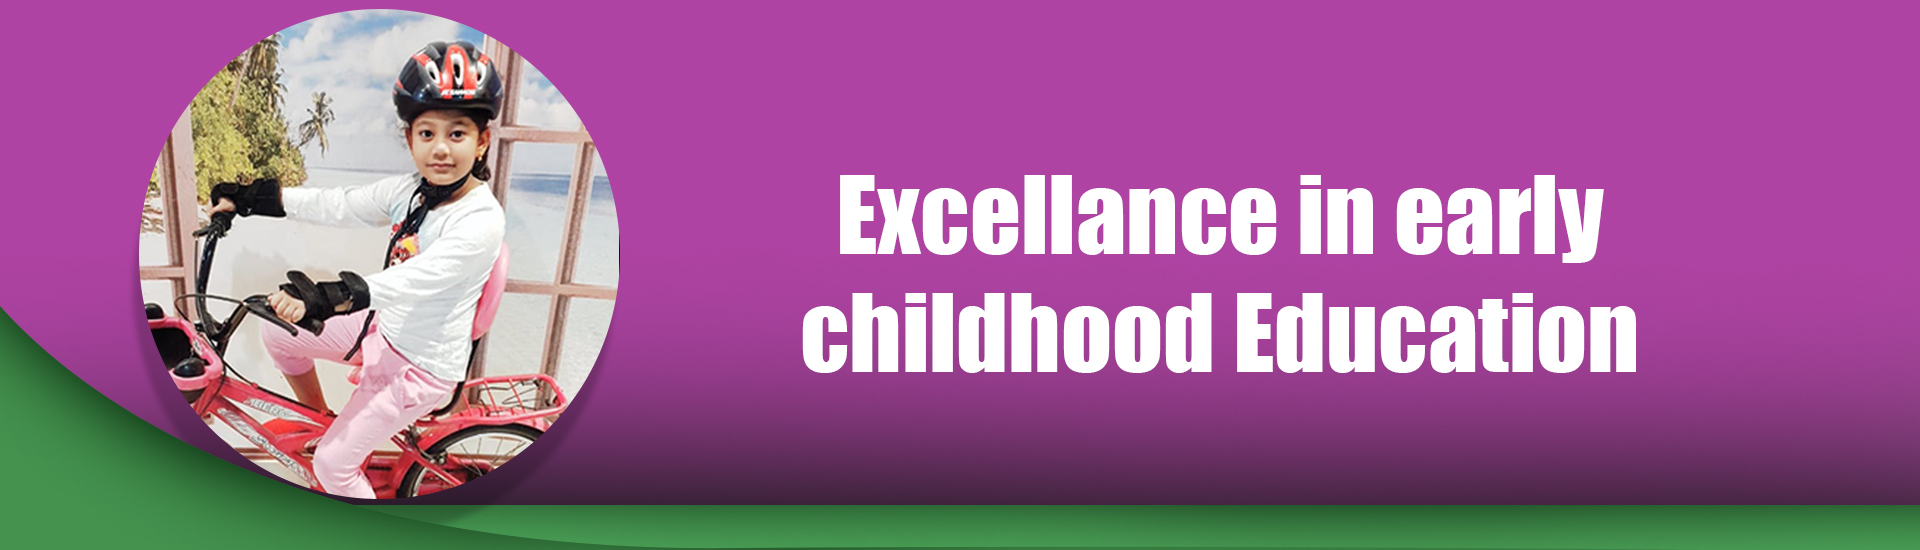 Welcome To Excellance Education Academy